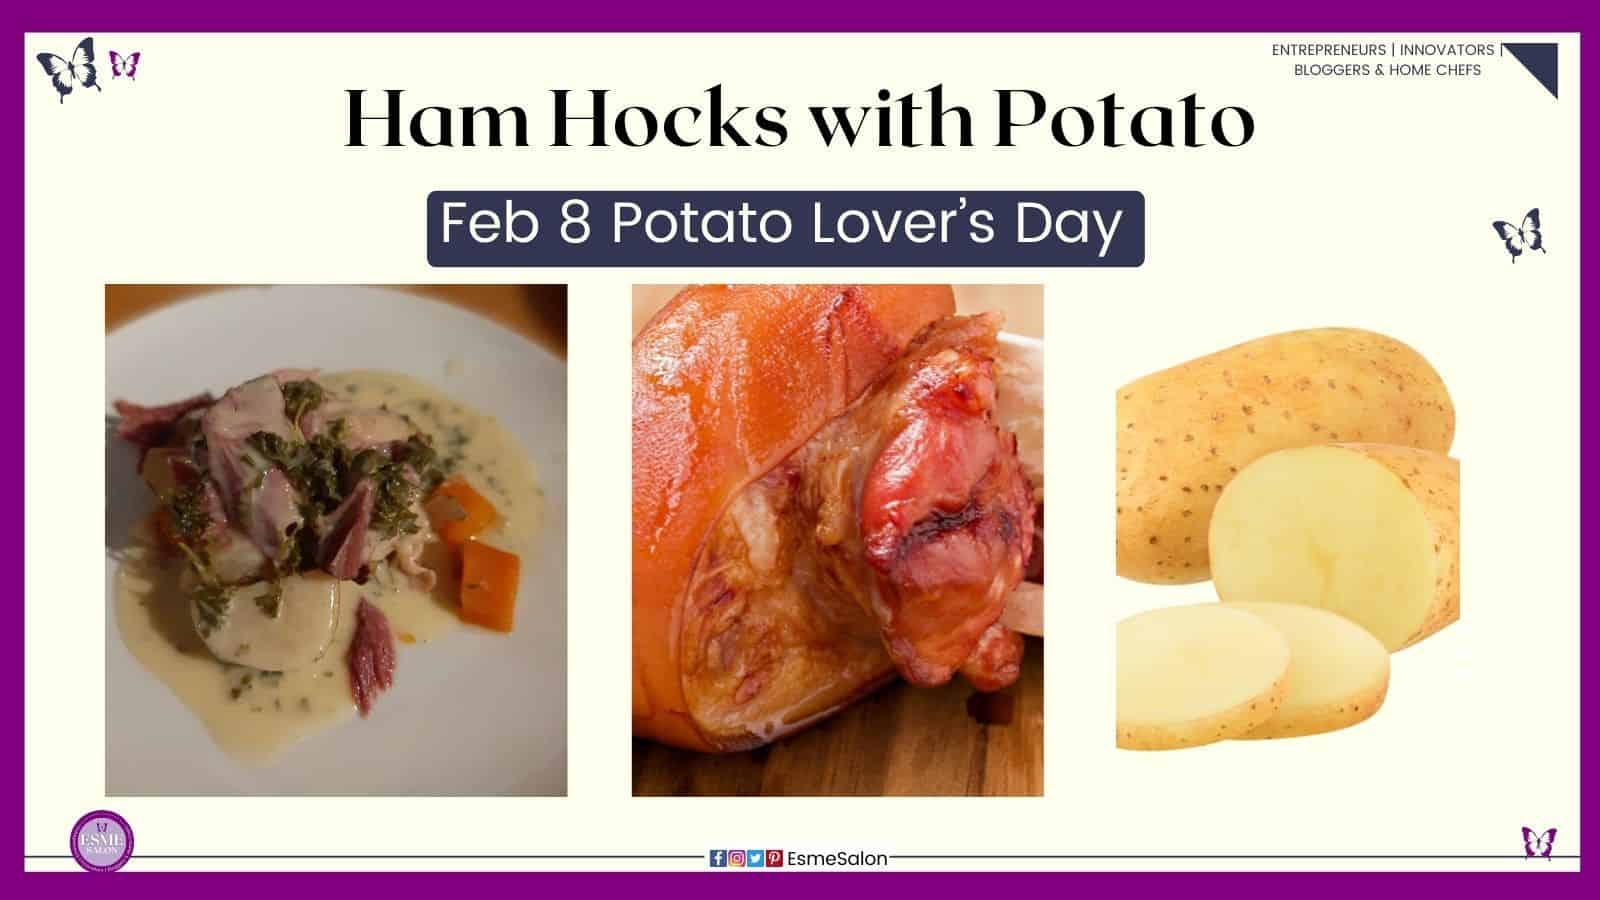 an image of a plate filled with Ham Hocks, potato and greens and carrots